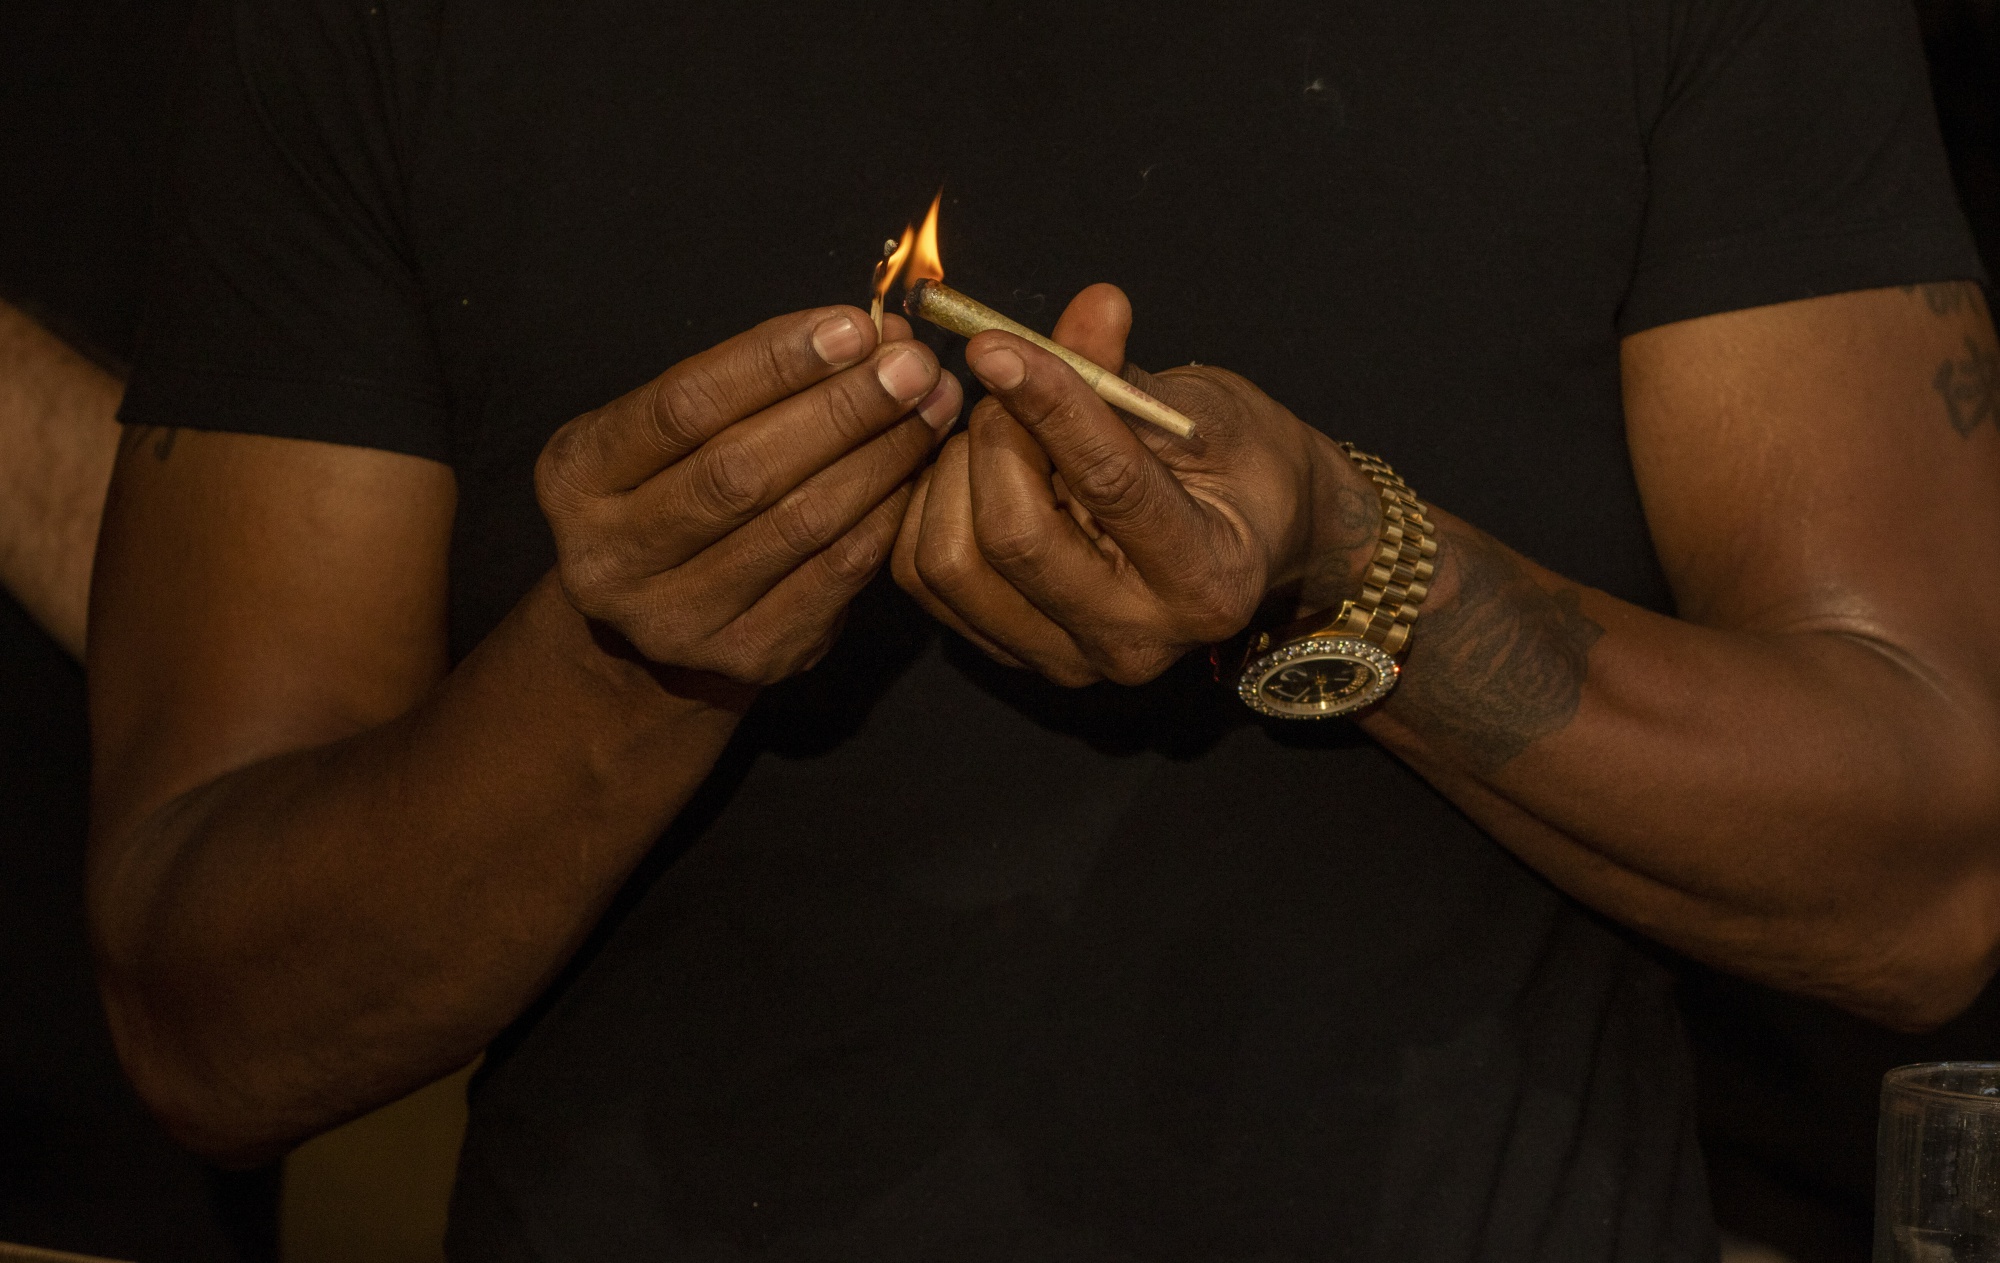 A customer lights a joint at a cannabis lounge in West Hollywood, California.